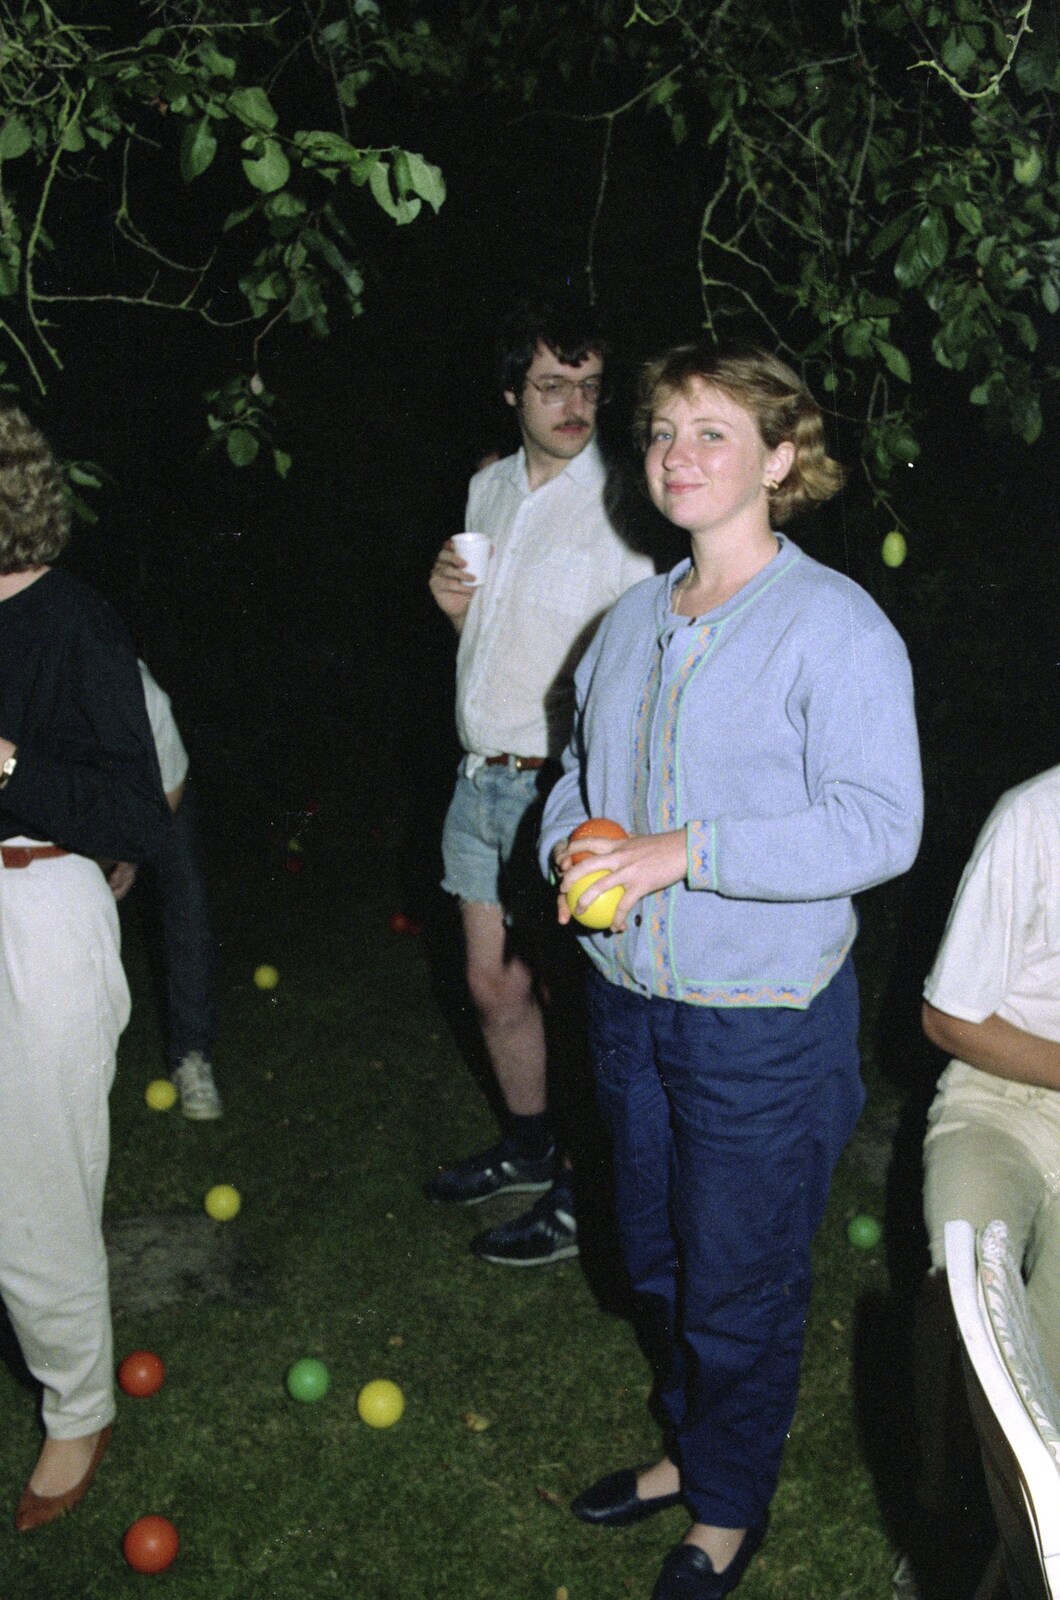 Chris and Phil's Party, Hordle, Hampshire - 6th September 1989: Balls in the garden